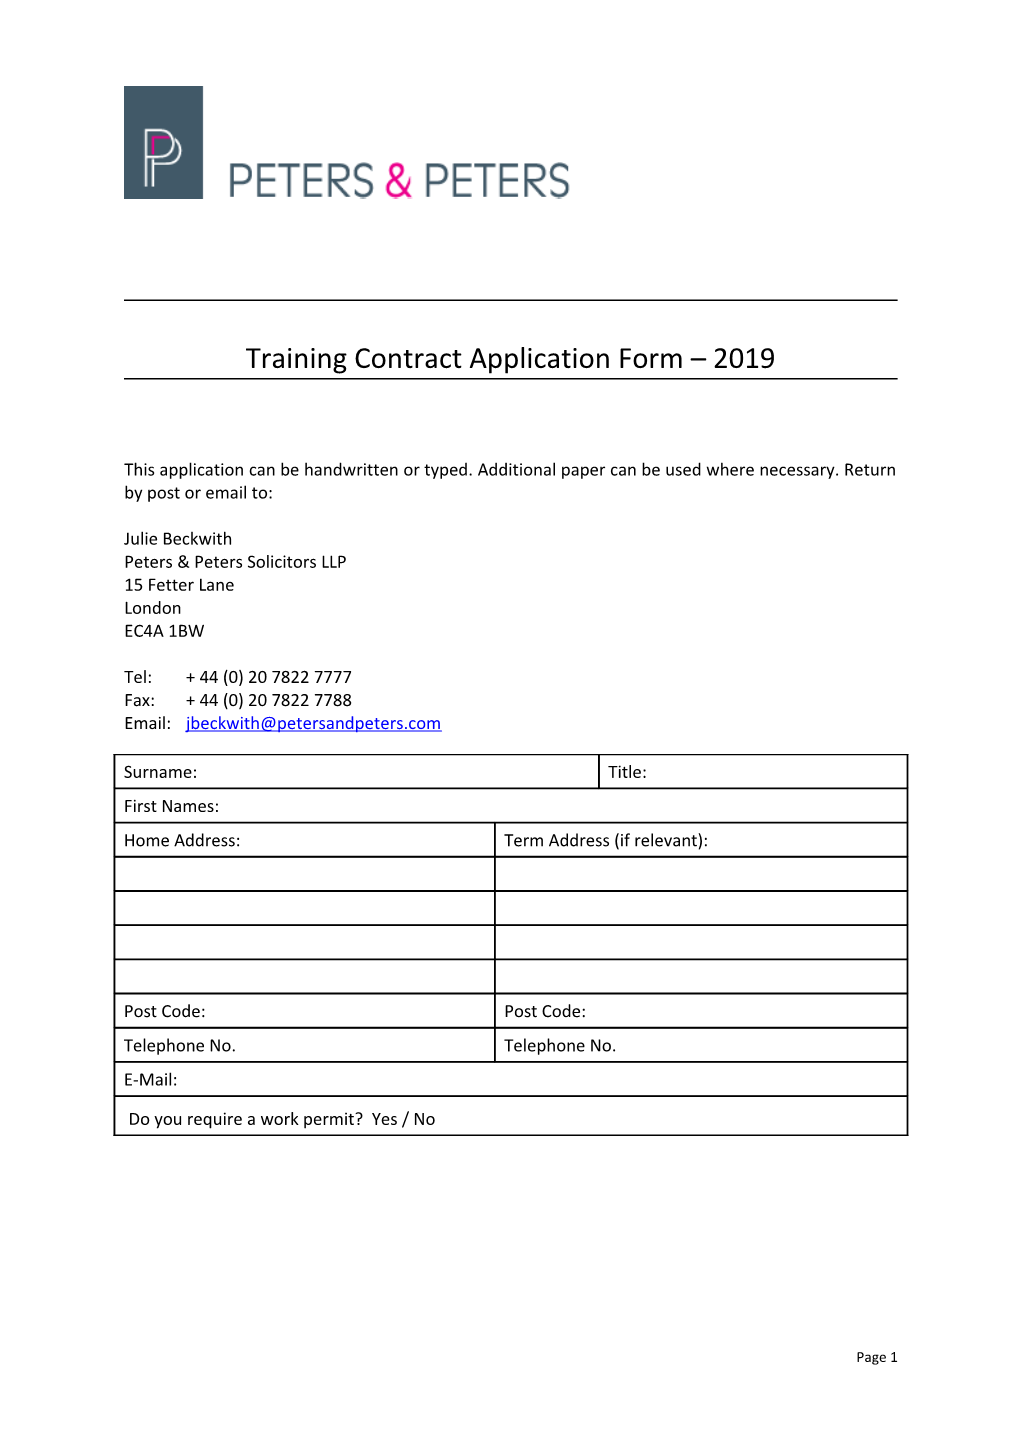 Application for Training Contract